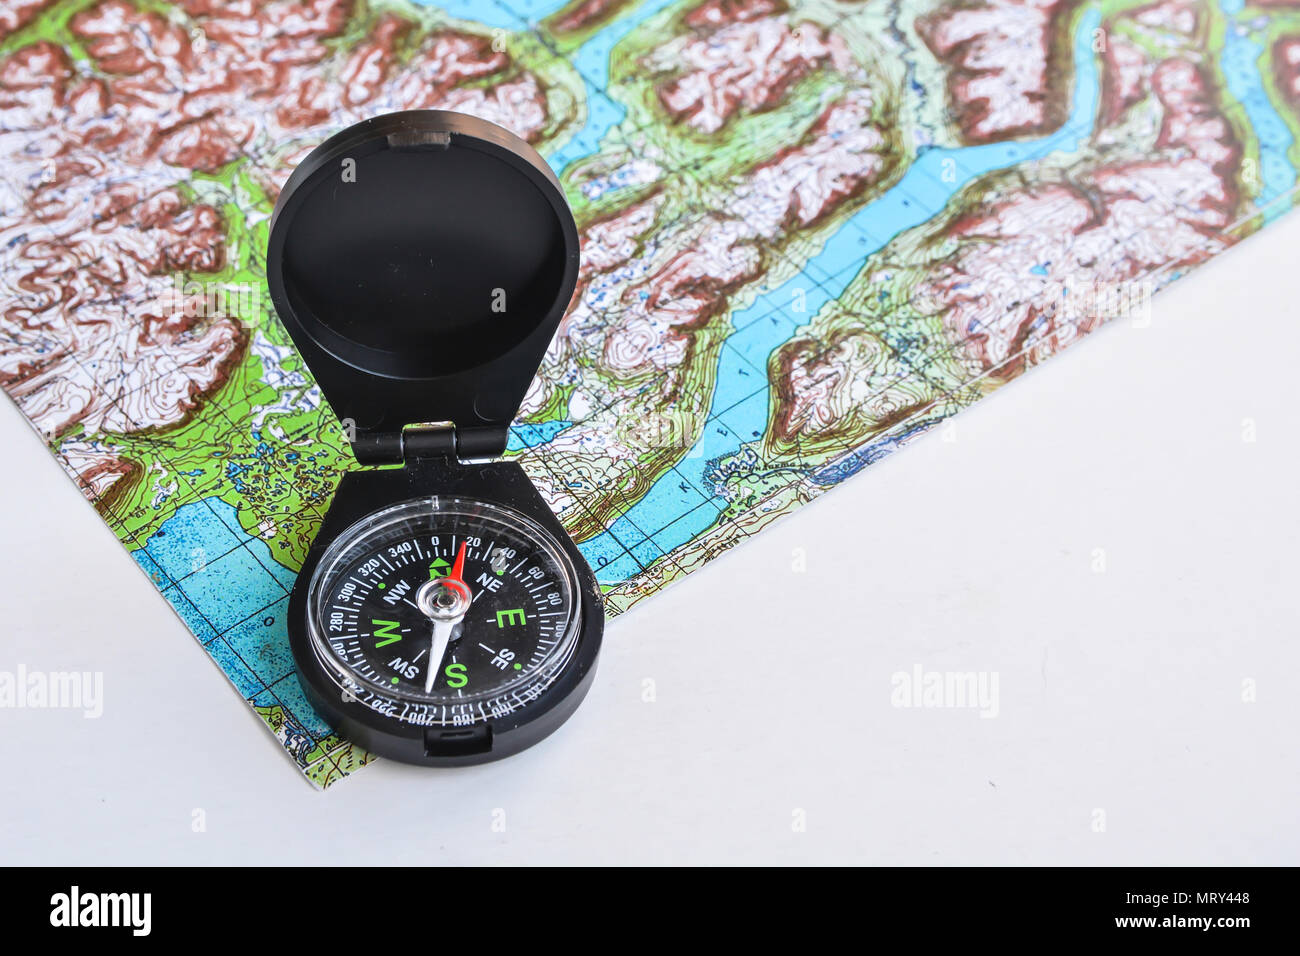 Compass and topographic map. Accessories travel so as not to get lost in the way. Stock Photo